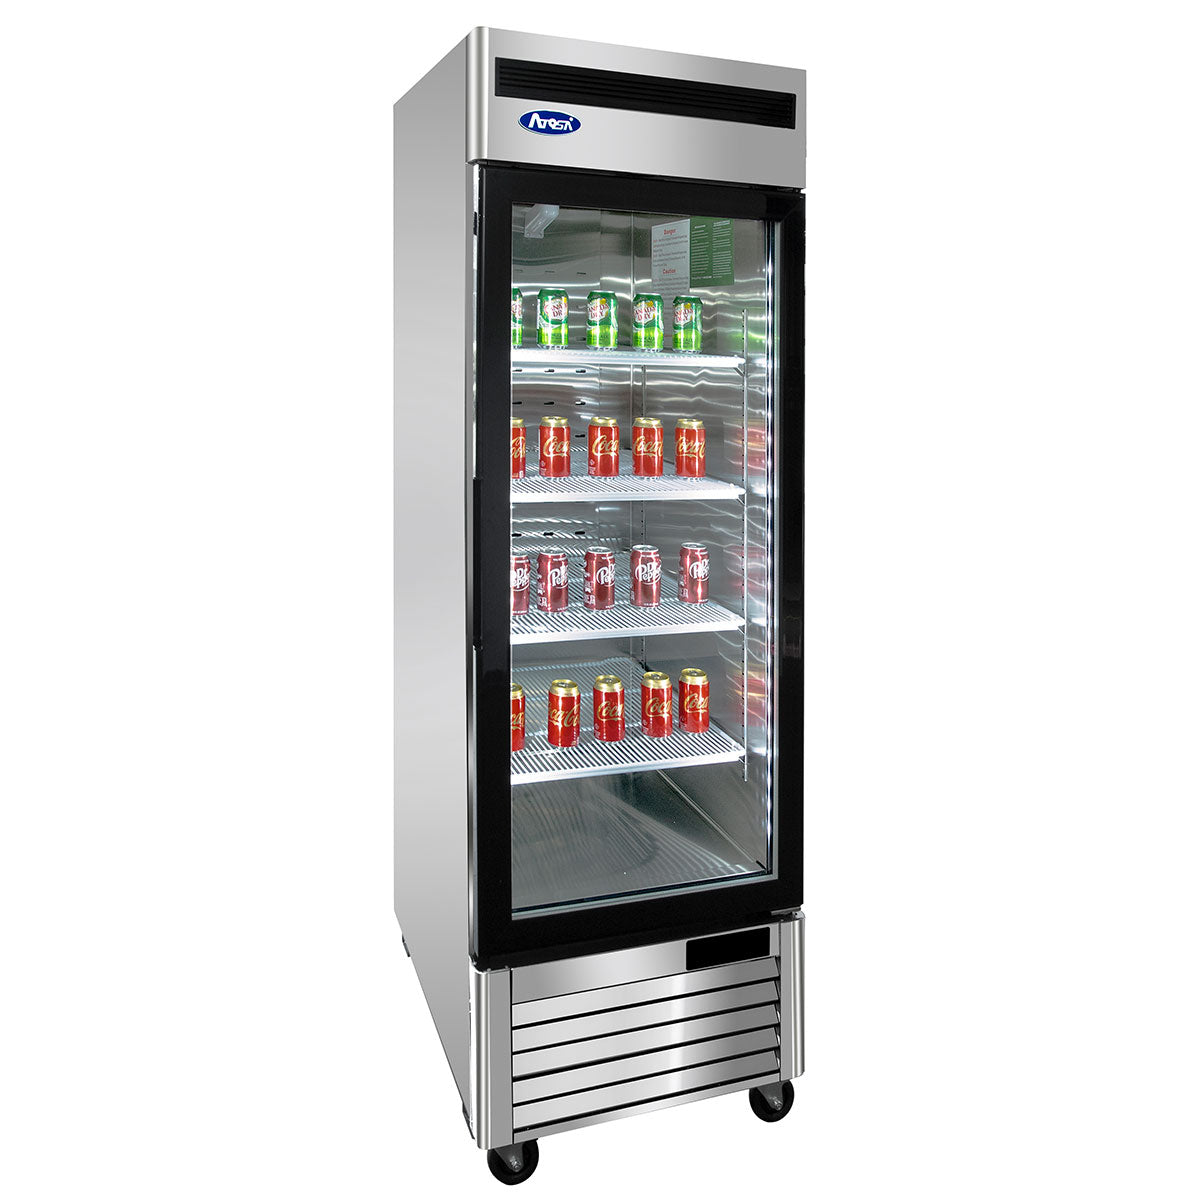 Atosa MCF8705GR Bottom Mount (1) Glass Door Refrigerator S/S In/Out Dimensions: 27 W * 31-7/10 D * 83-1/10 H